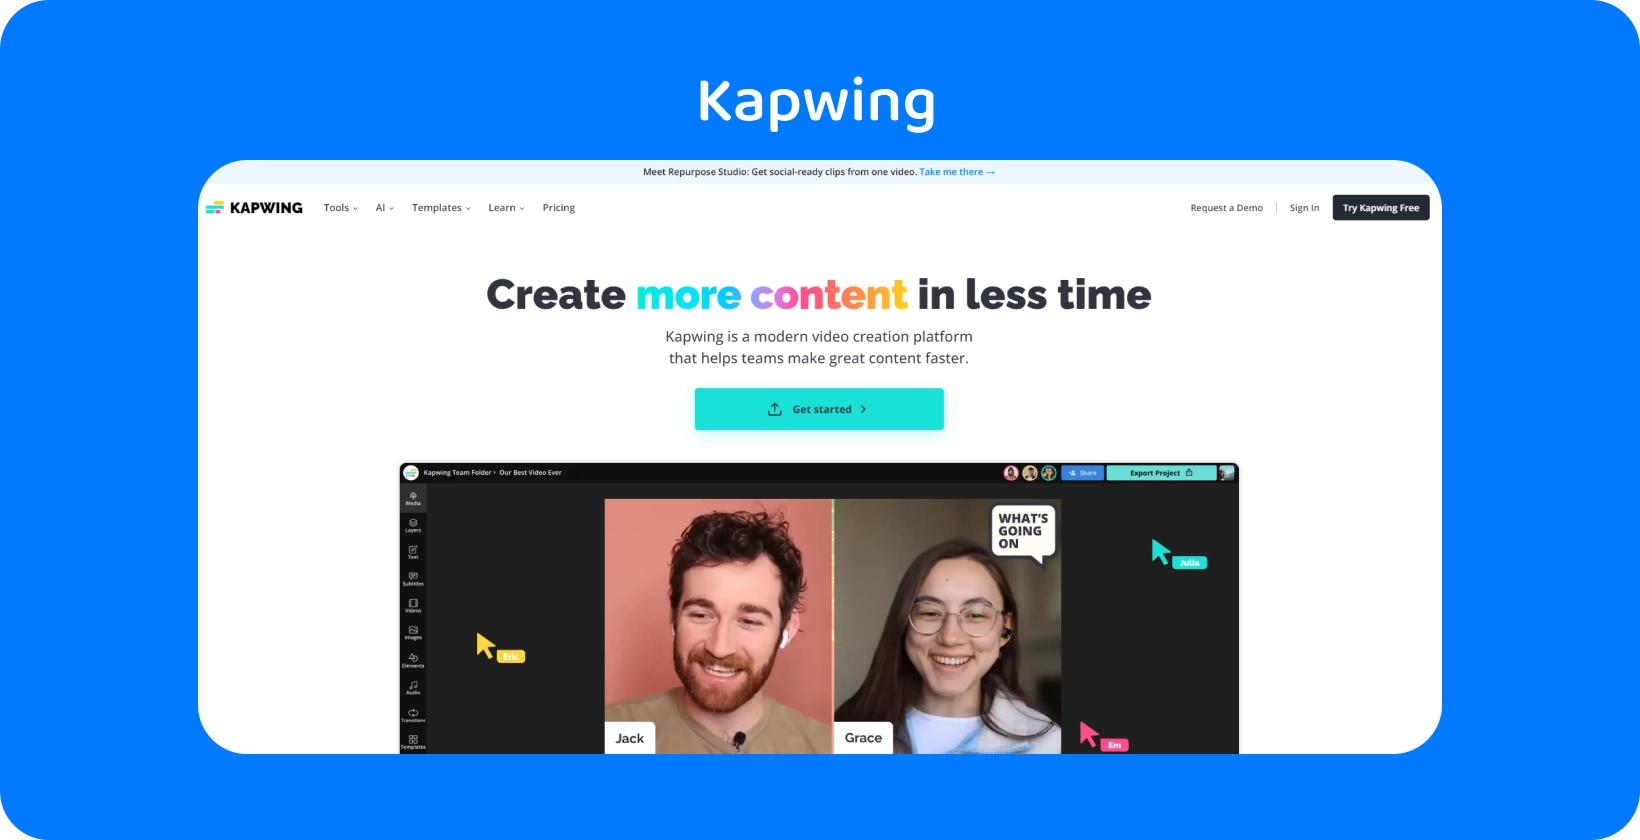 Kapwing subtitle editor showcased with a user-friendly interface, aiding teams in efficient content creation.